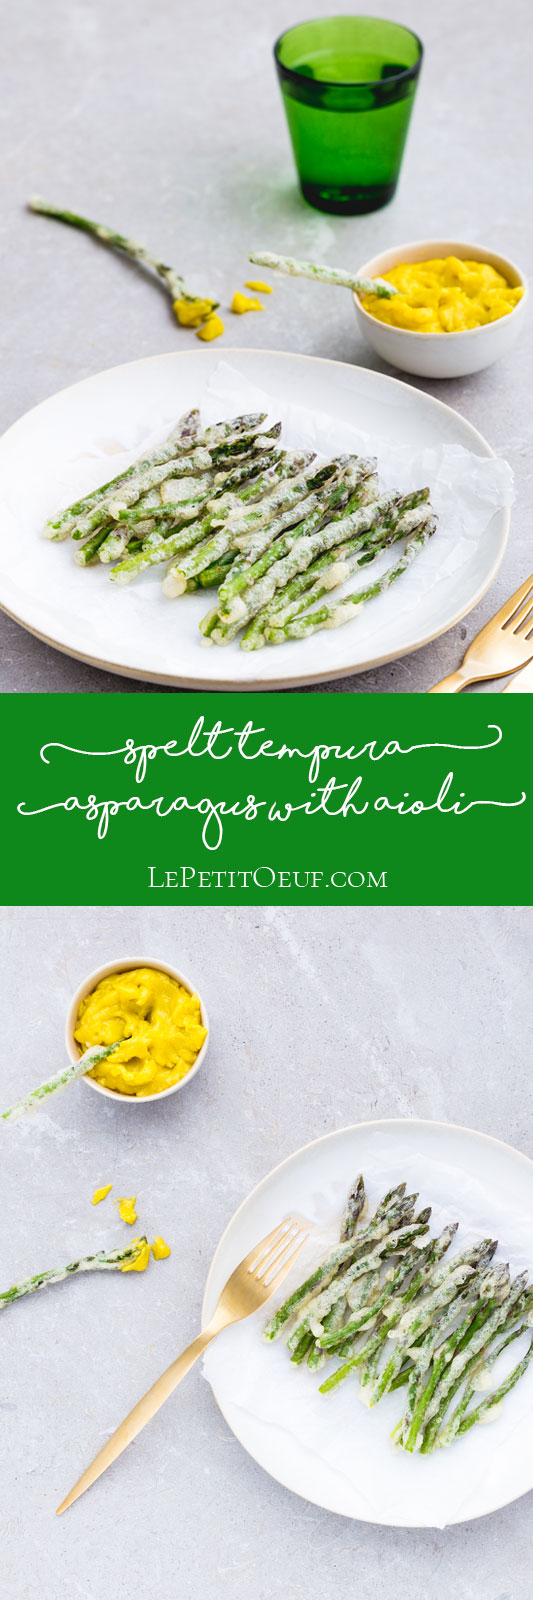 It's time to take advantage of the beautiful British asparagus season, what better way than simple spelt tempura asparagus, served with a delicious garlicky aioli. This may sound complicated, but they are such simple recipes that give a feeling of mastery and sound utterly seductive. These vegetarian dishes make beautiful starters which your guests will be seriously impressed with.